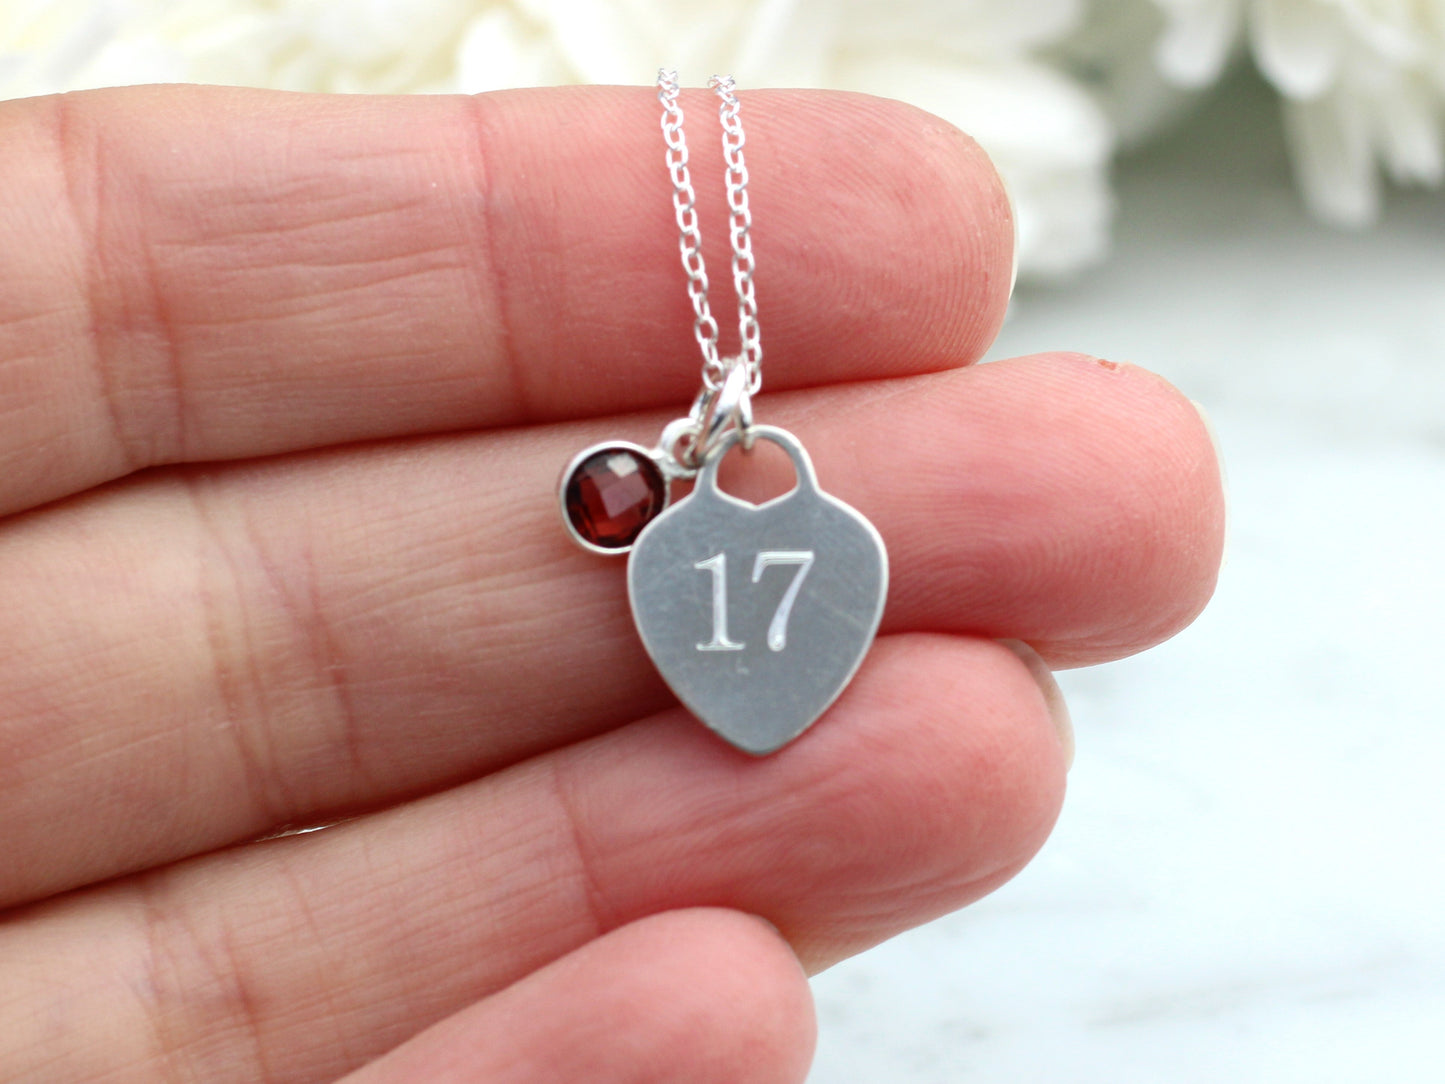 18th birthday necklace in silver.